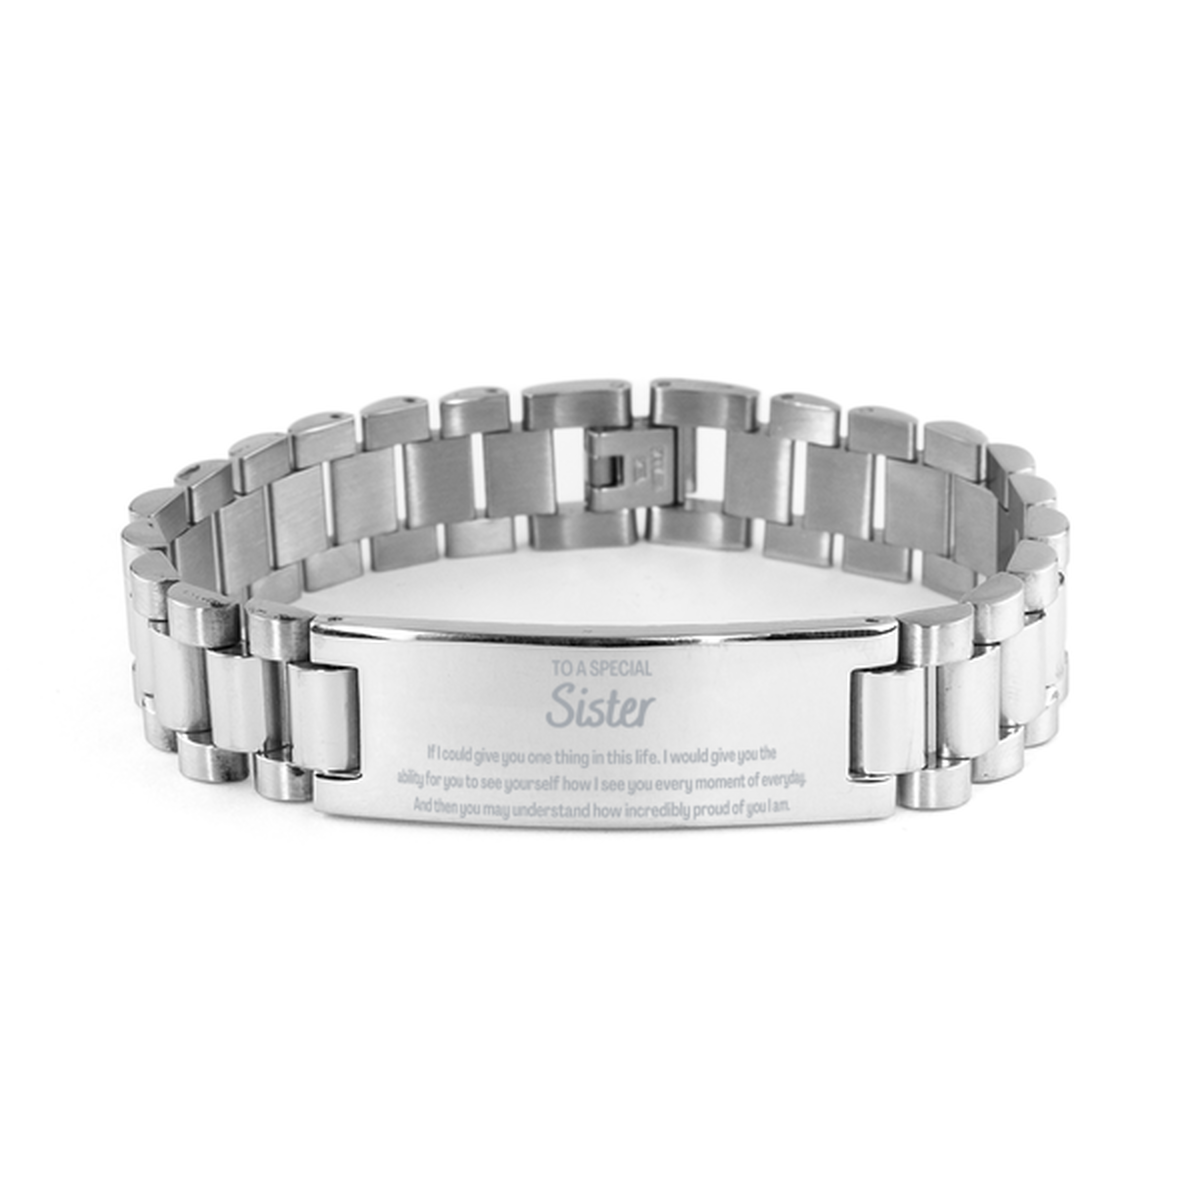 To My Sister Ladder Stainless Steel Bracelet, Gifts For Sister Engraved, Inspirational Gifts for Christmas Birthday, Epic Gifts for Sister To A Special Sister how incredibly proud of you I am